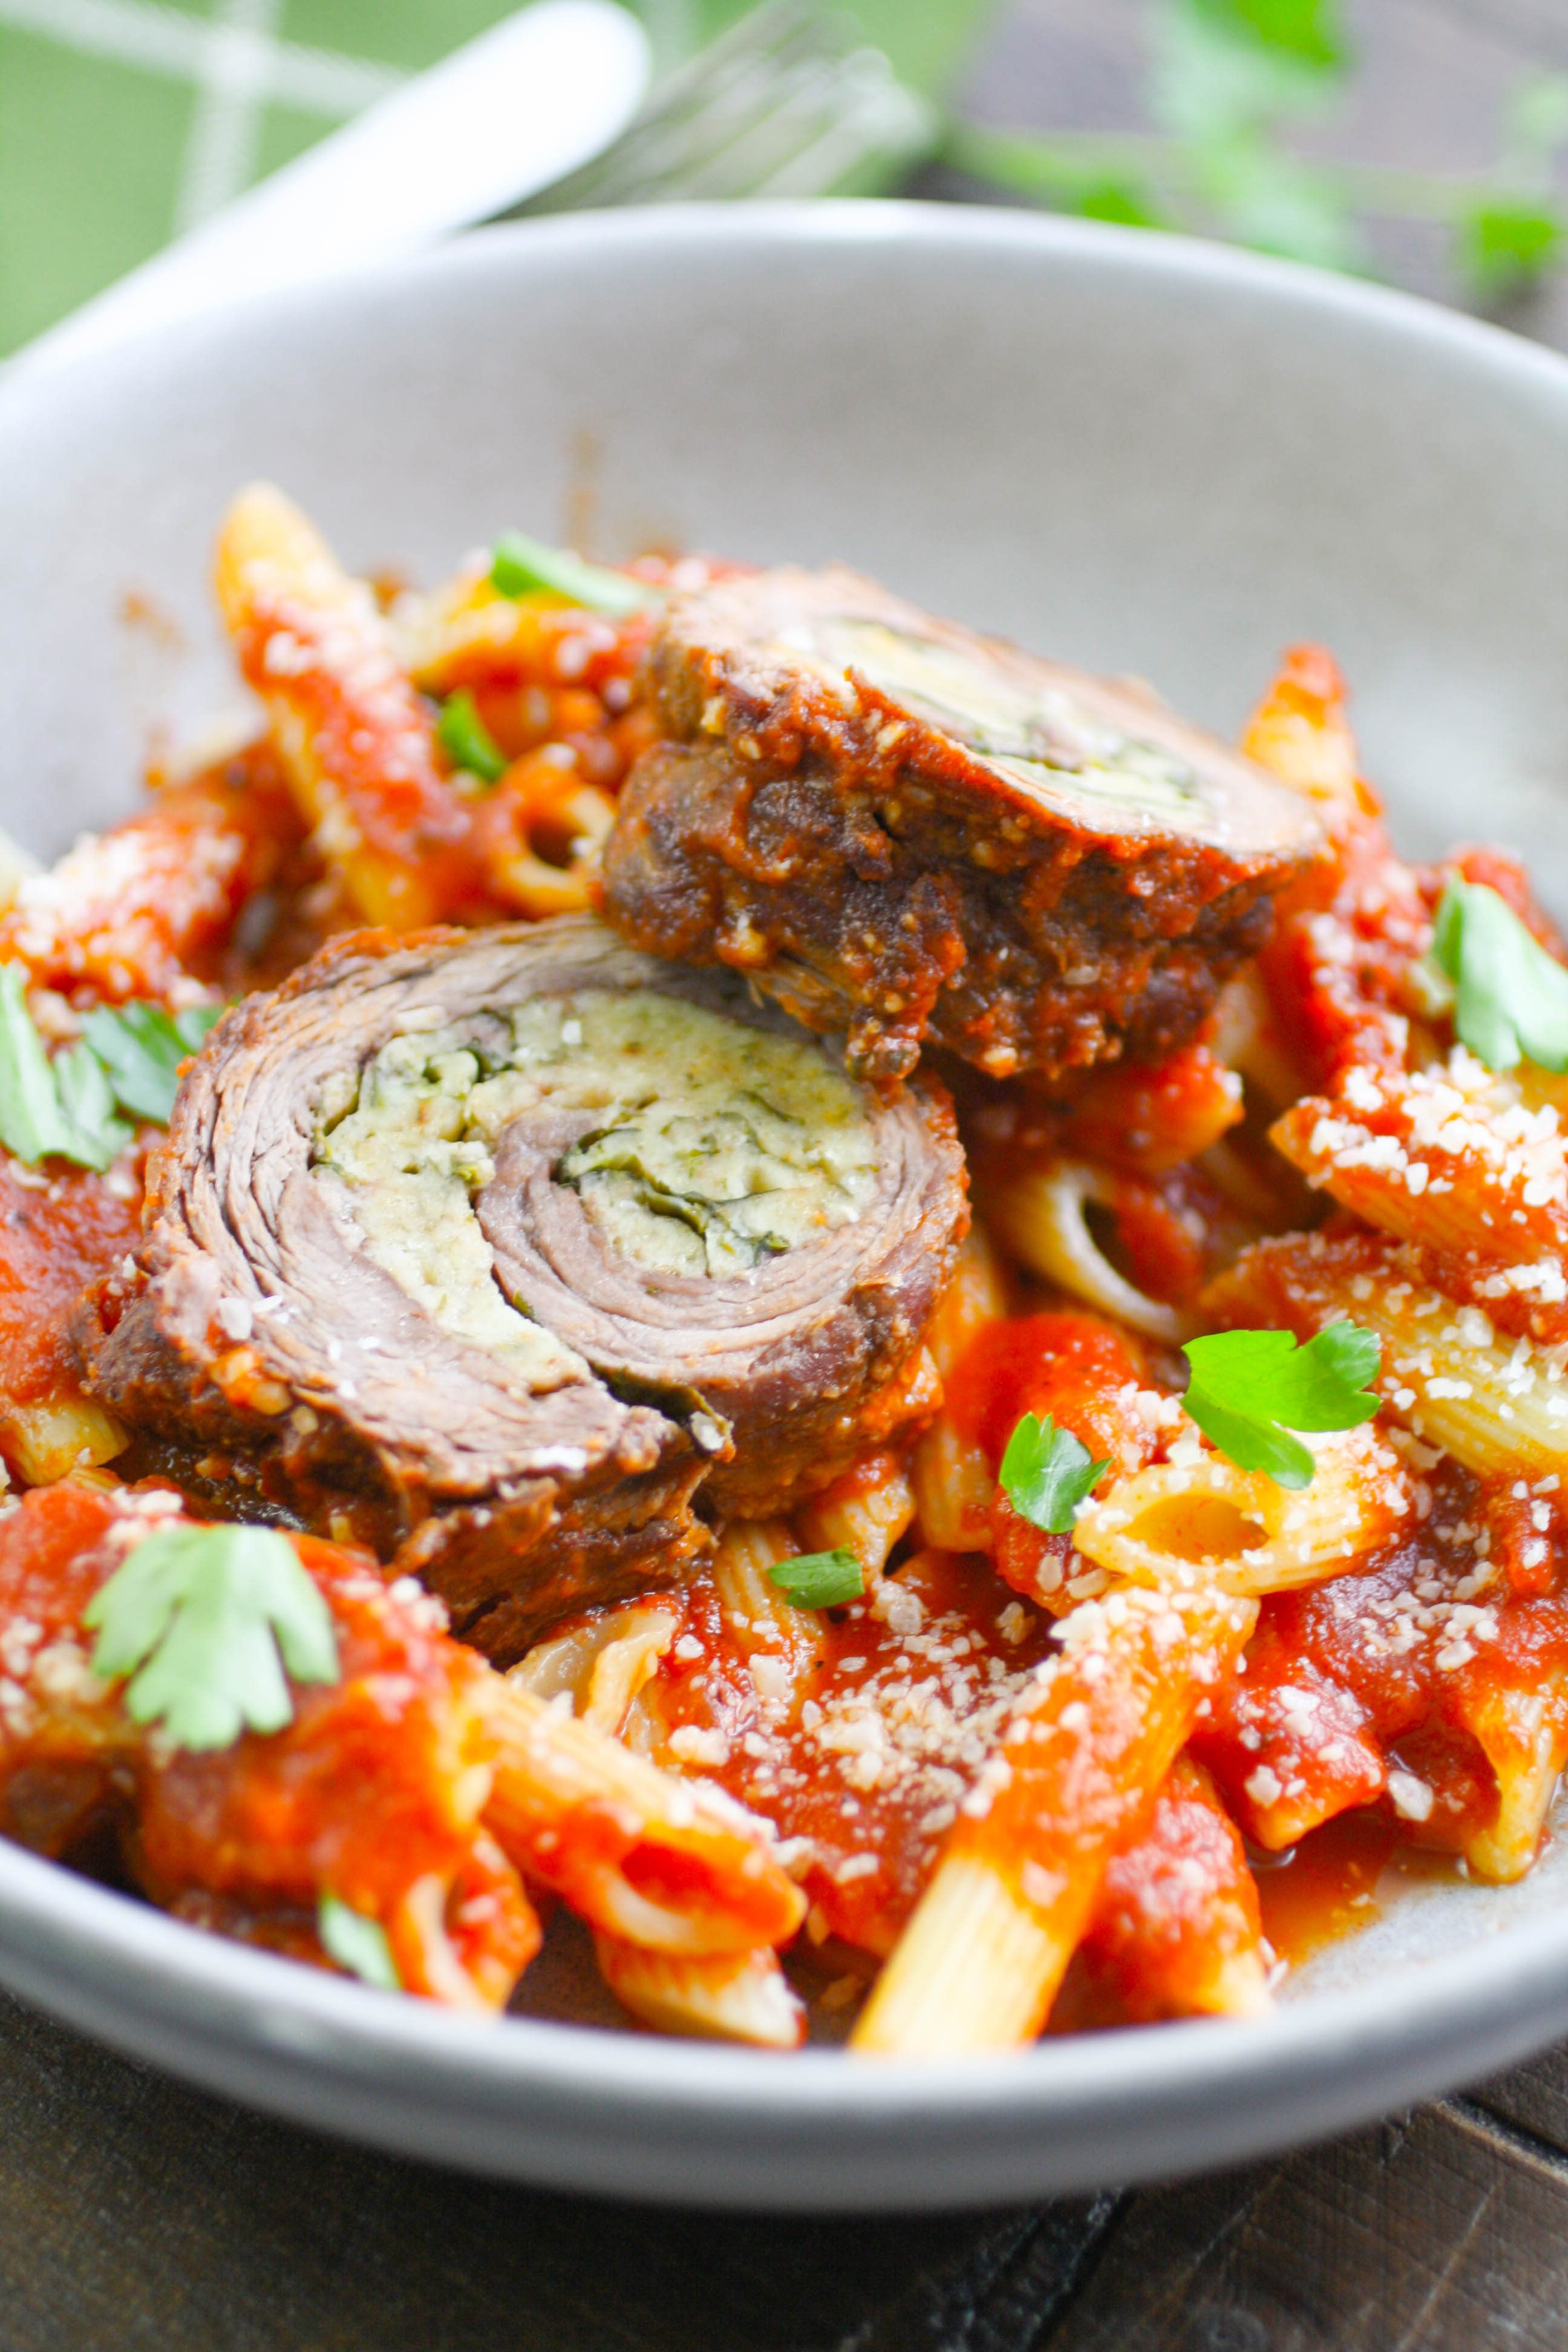 Beef Braciole is an Italian classic that is makes a lovely meal. You'll love this Beef Braciole.